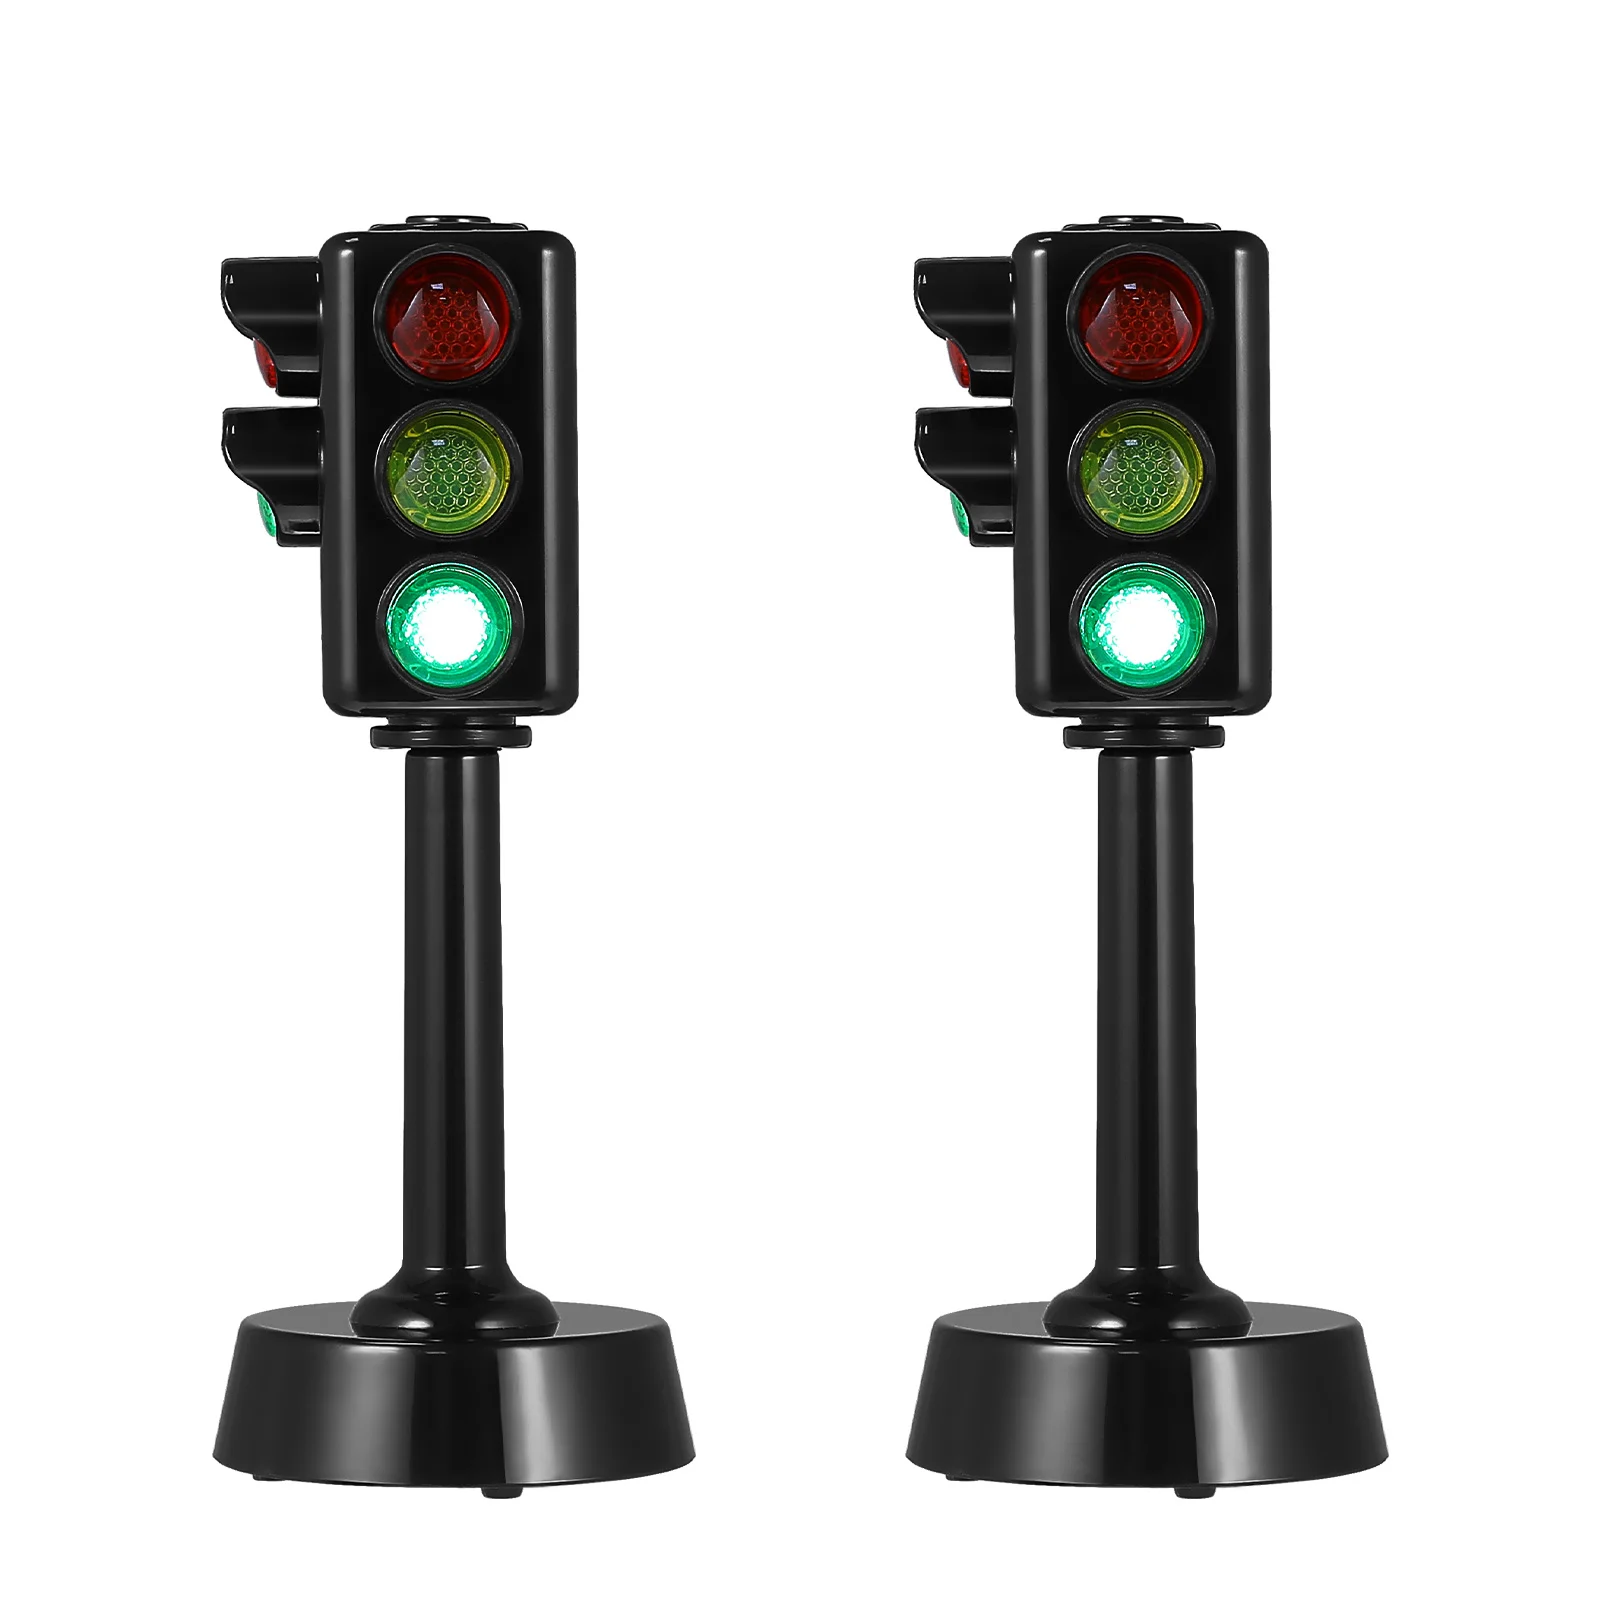 

Traffic Light Toddlers Signal Lamps Educational Toy Tabletop Road Model Kids Stop Miniature Stoplight Led